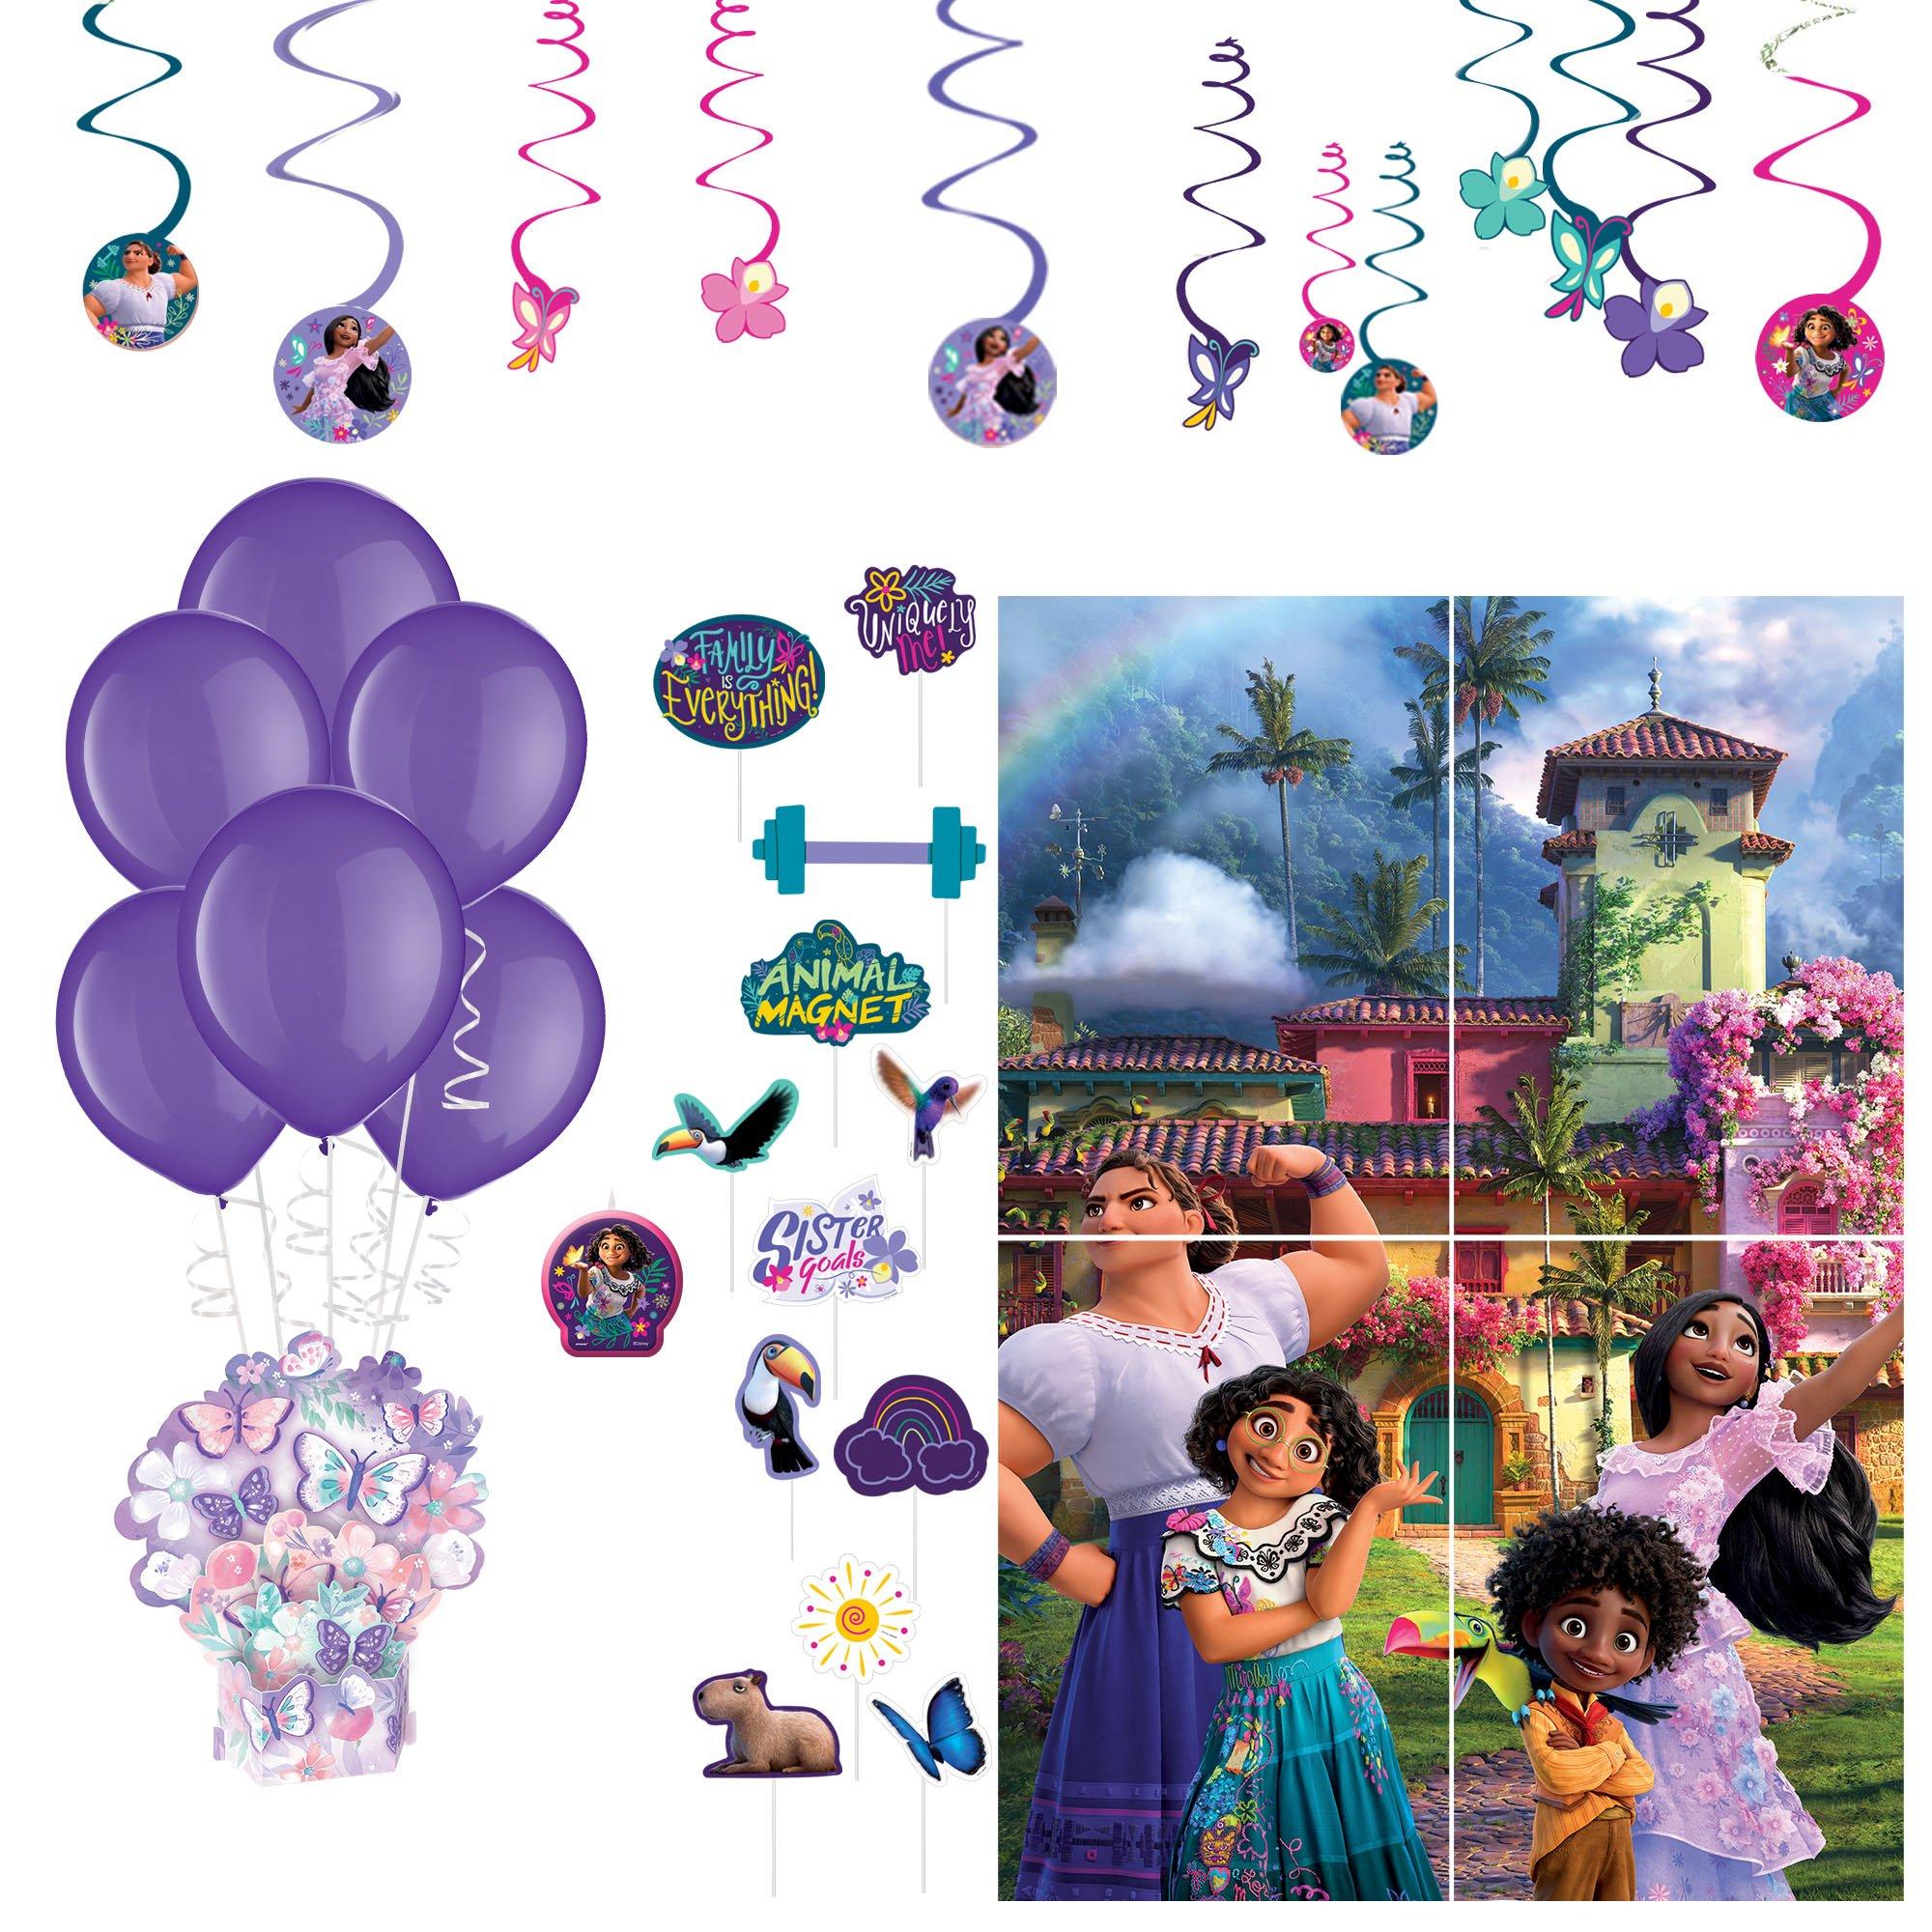 Encanto Birthday Party Decorating Supplies Pack - Kit Includes Centerpiece, Latex Balloons, Swirl Decorations, Scene Setter, Photo Booth Props & Candle